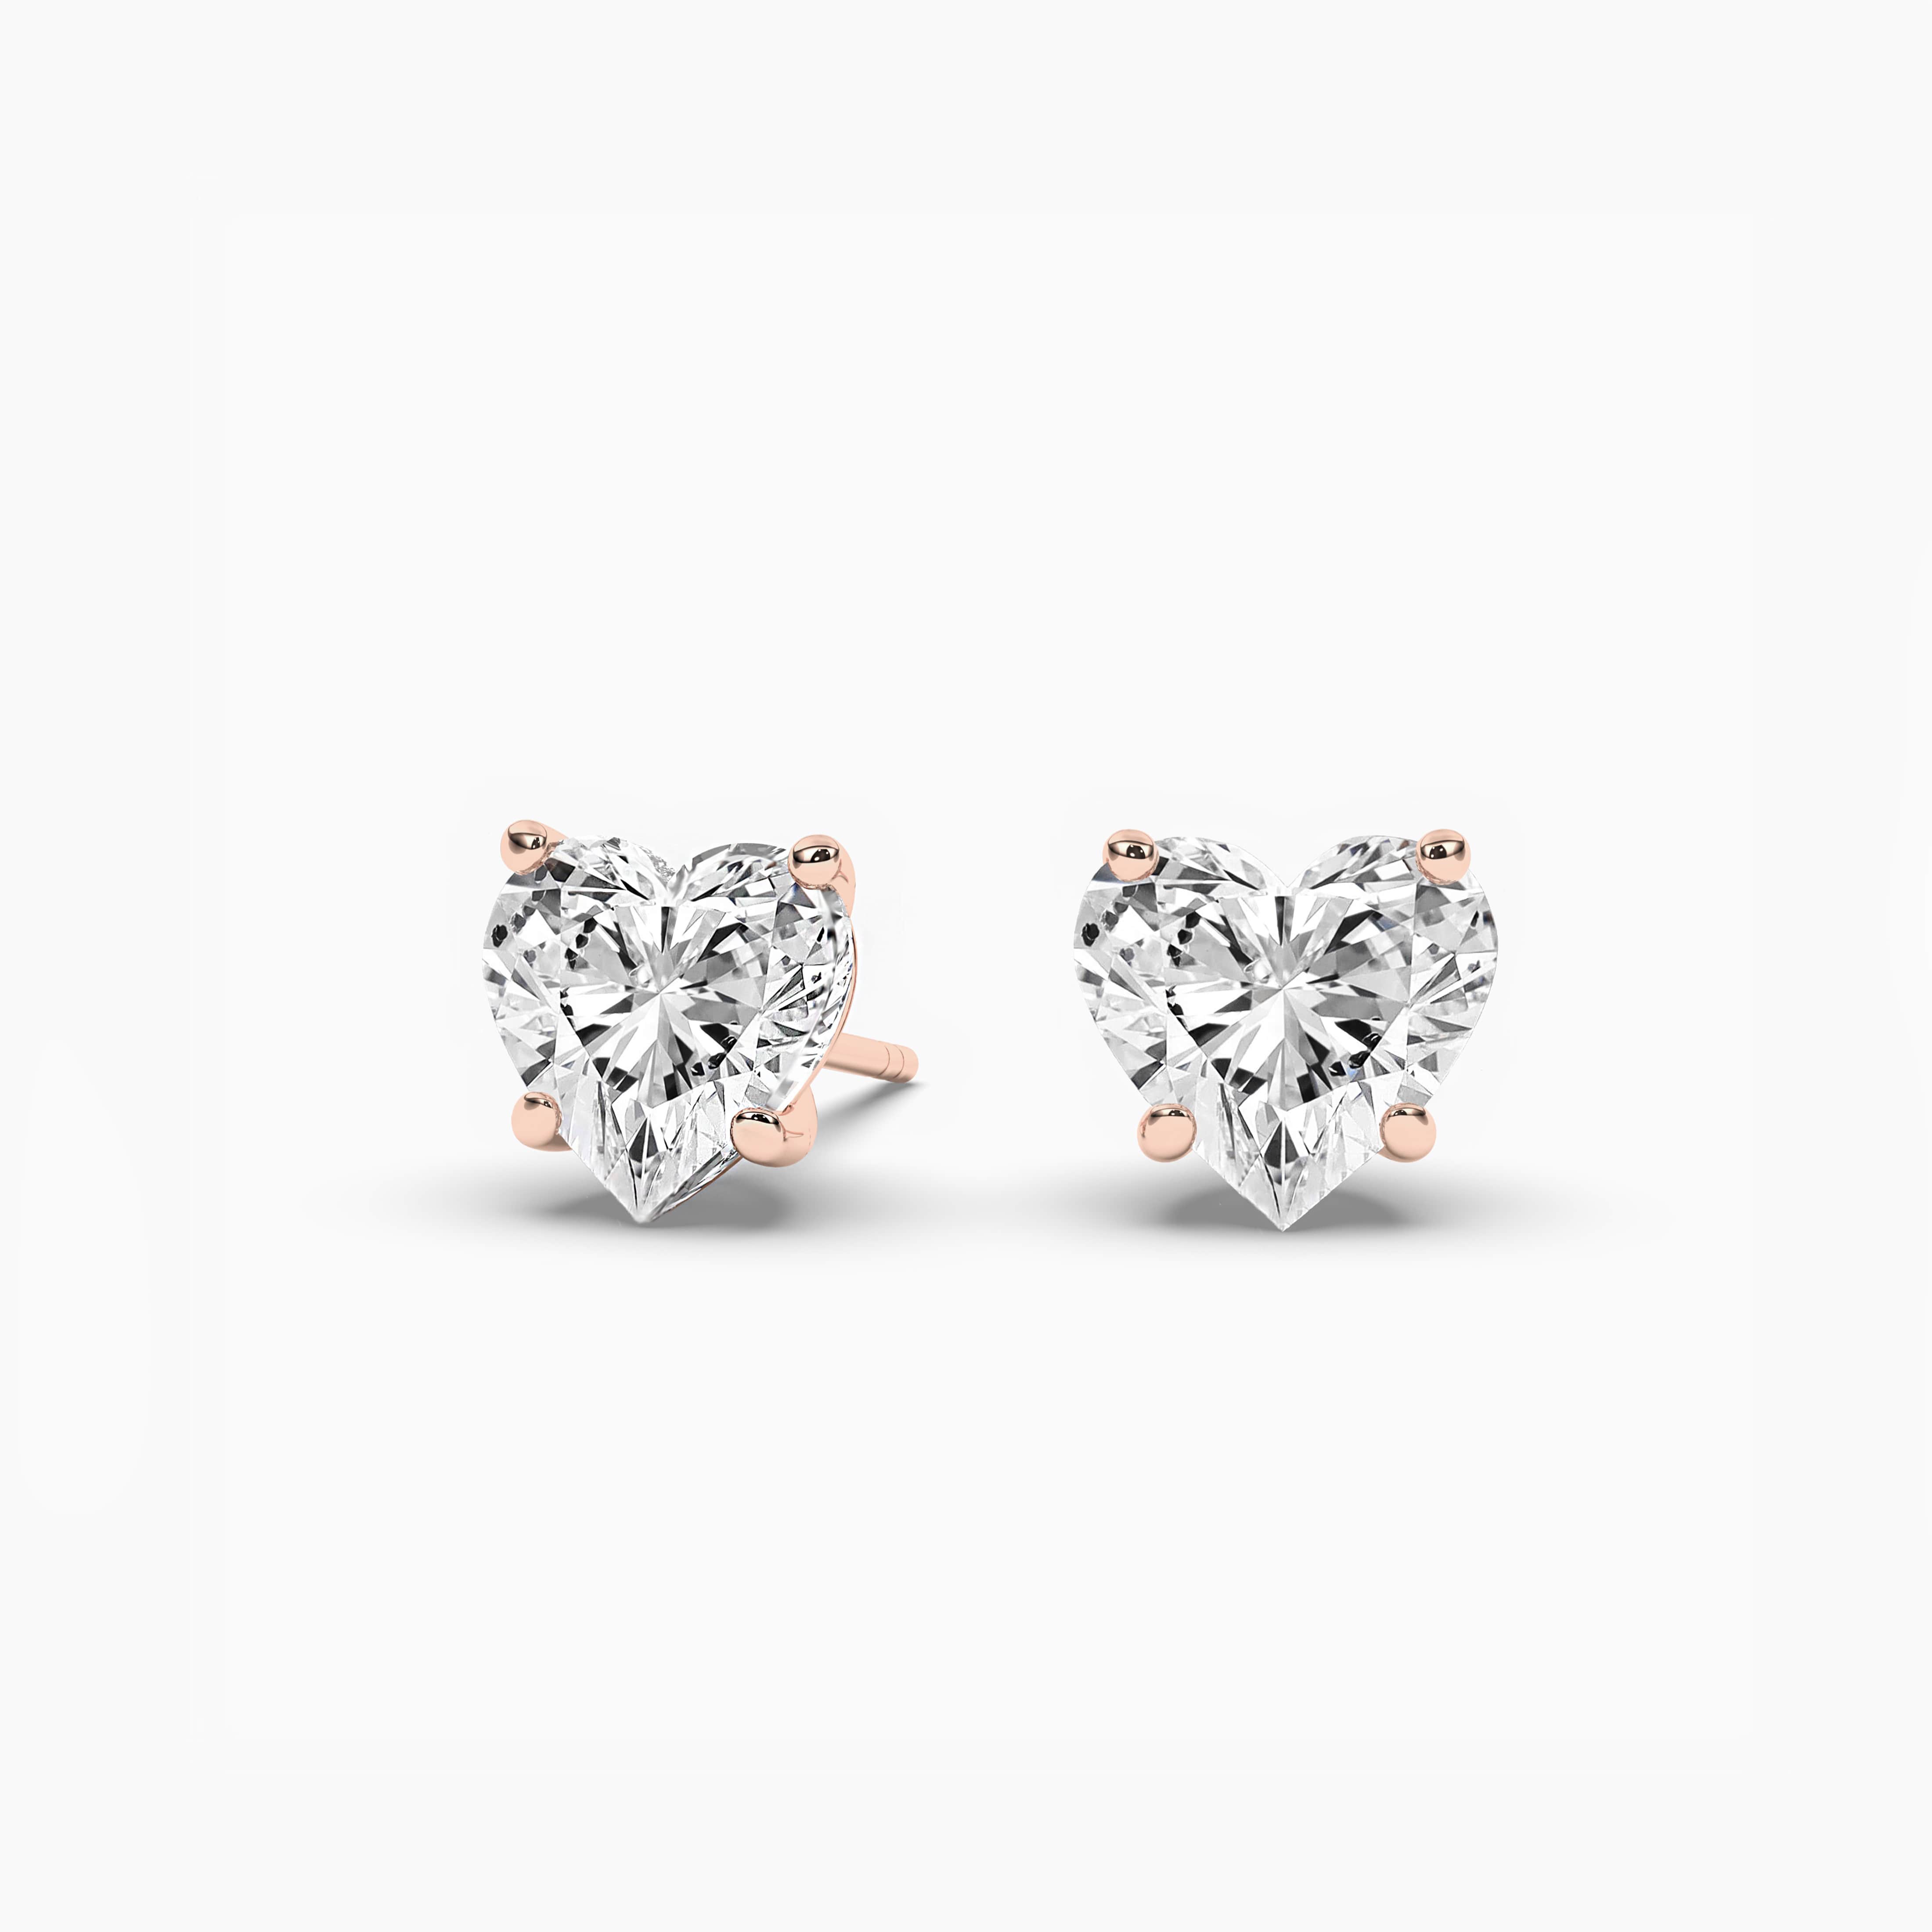 Buy PS CREATION Solitaire Single Stone Diamond Silver Gold Stud Earrings  Combo Pack Set at Amazon.in